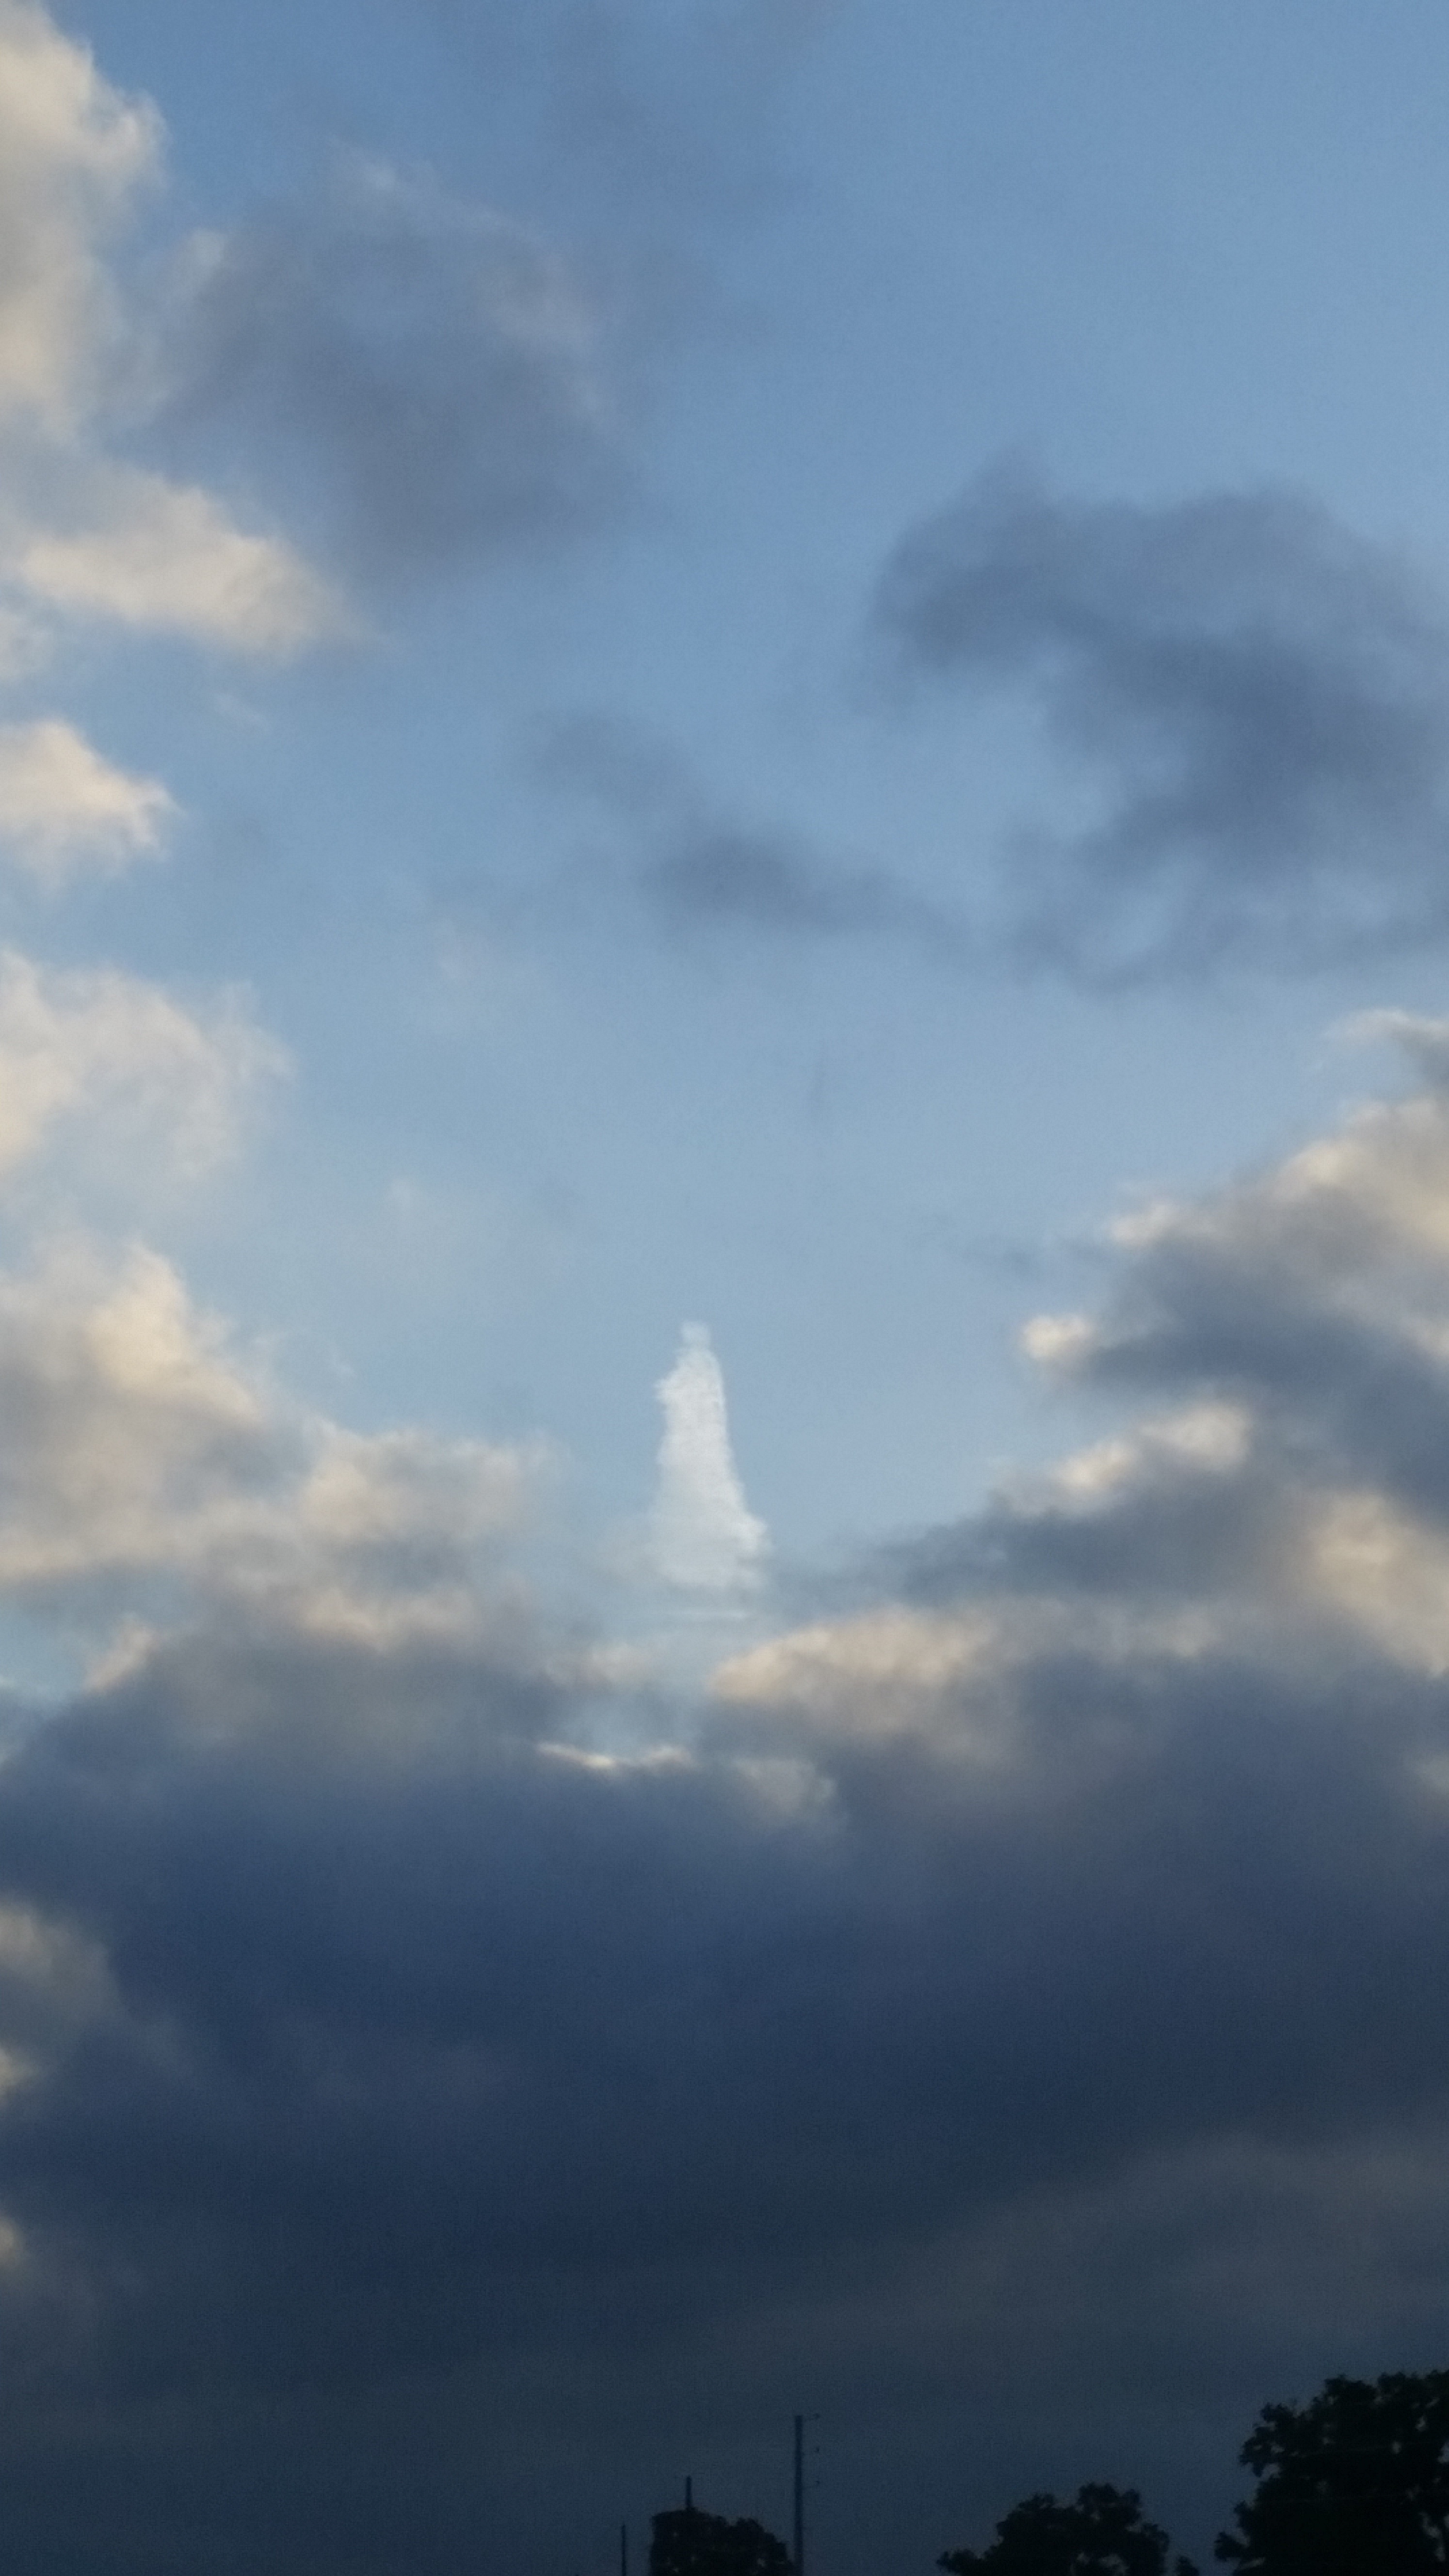 Image Of Jesus In The Clouds